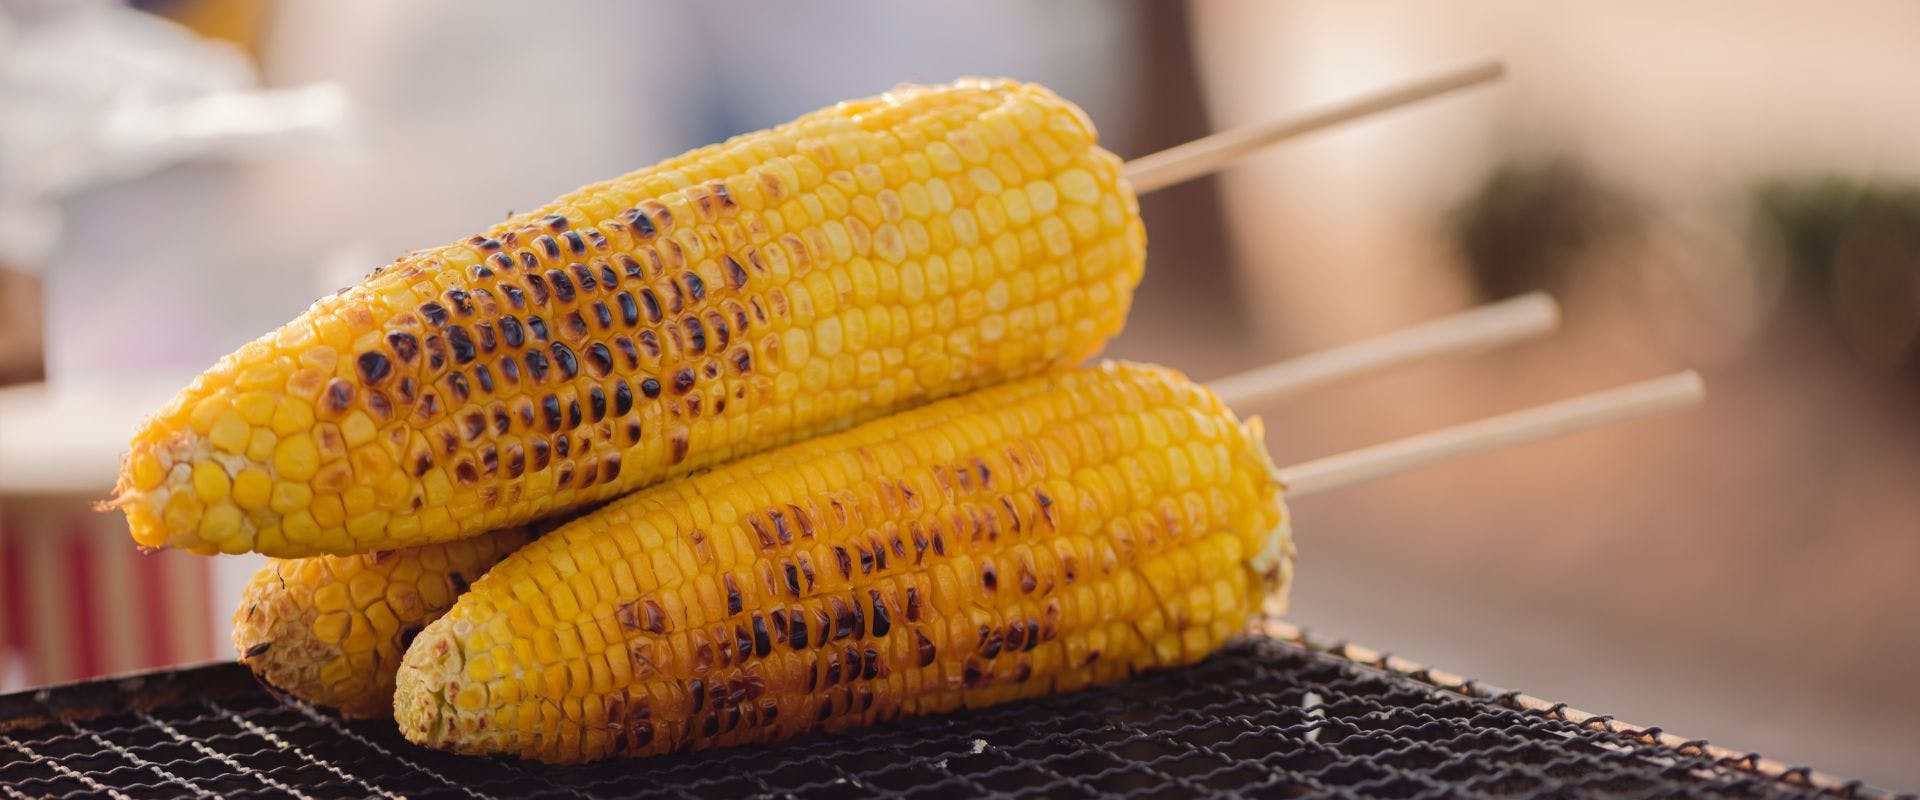 Corn on the cob on grill 